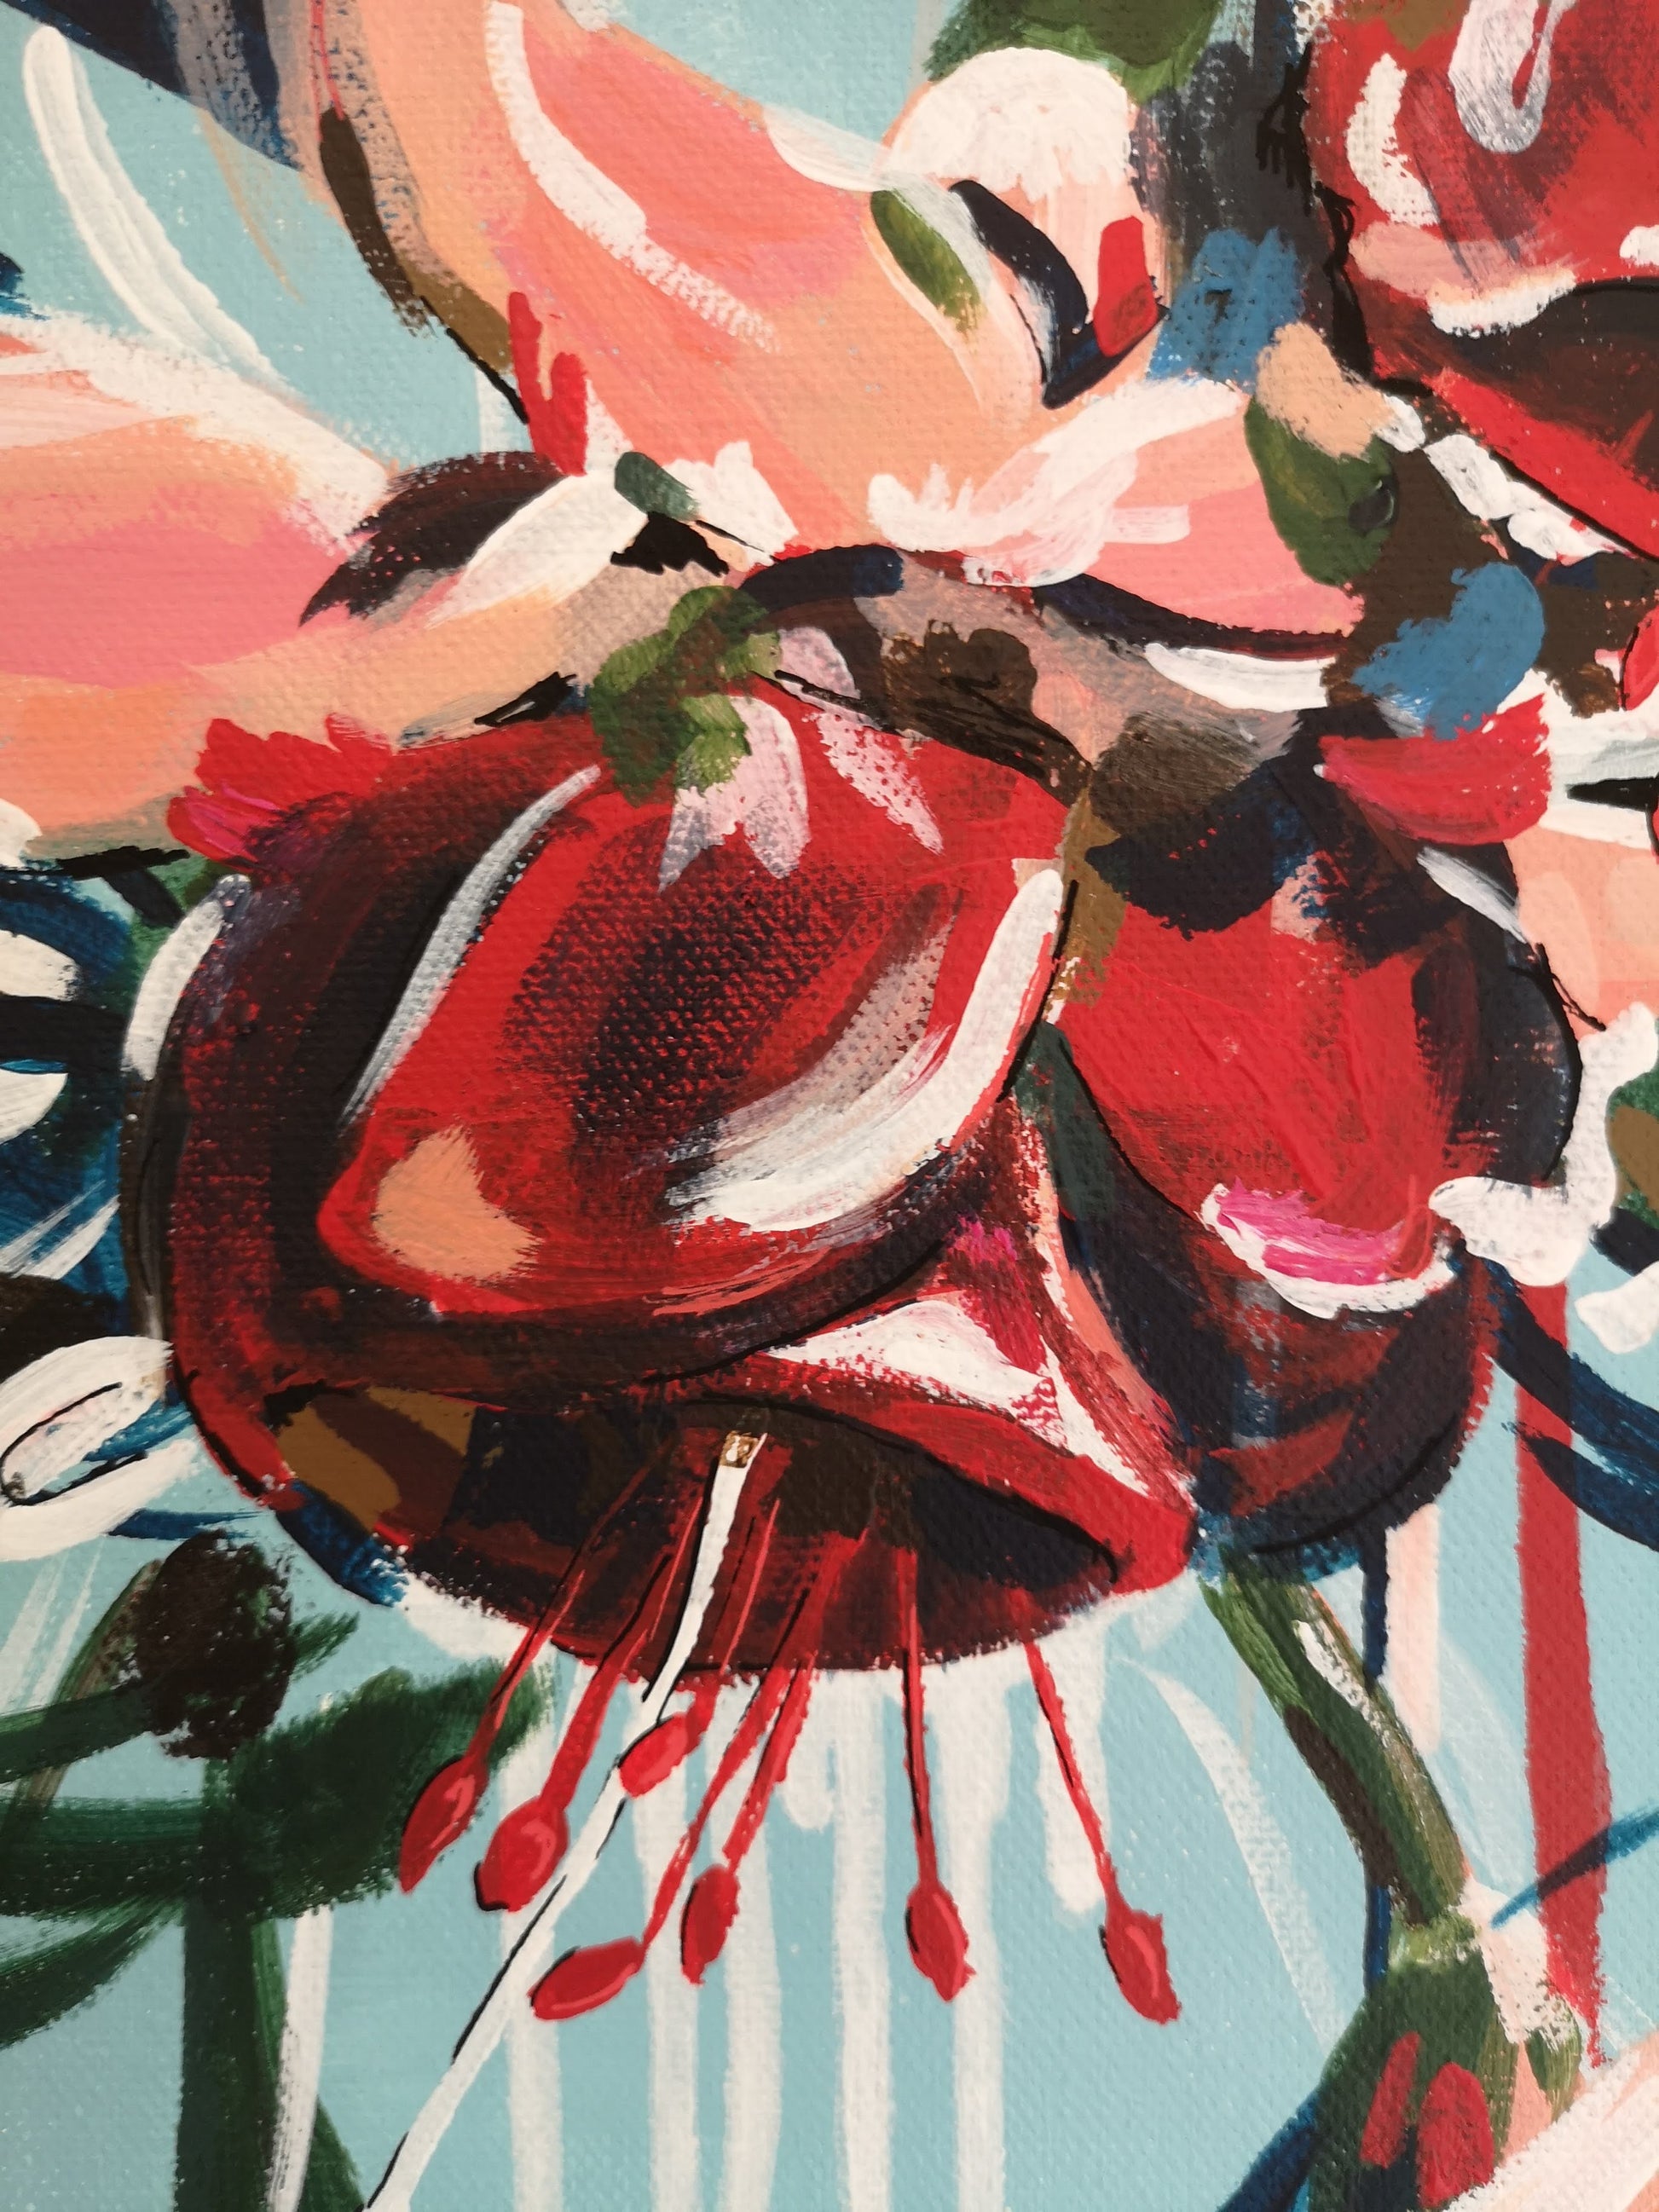 close up details of abstract floral artwork by Judy Century. Details of an expressive fuscia flower in reds, peach pinks and brown